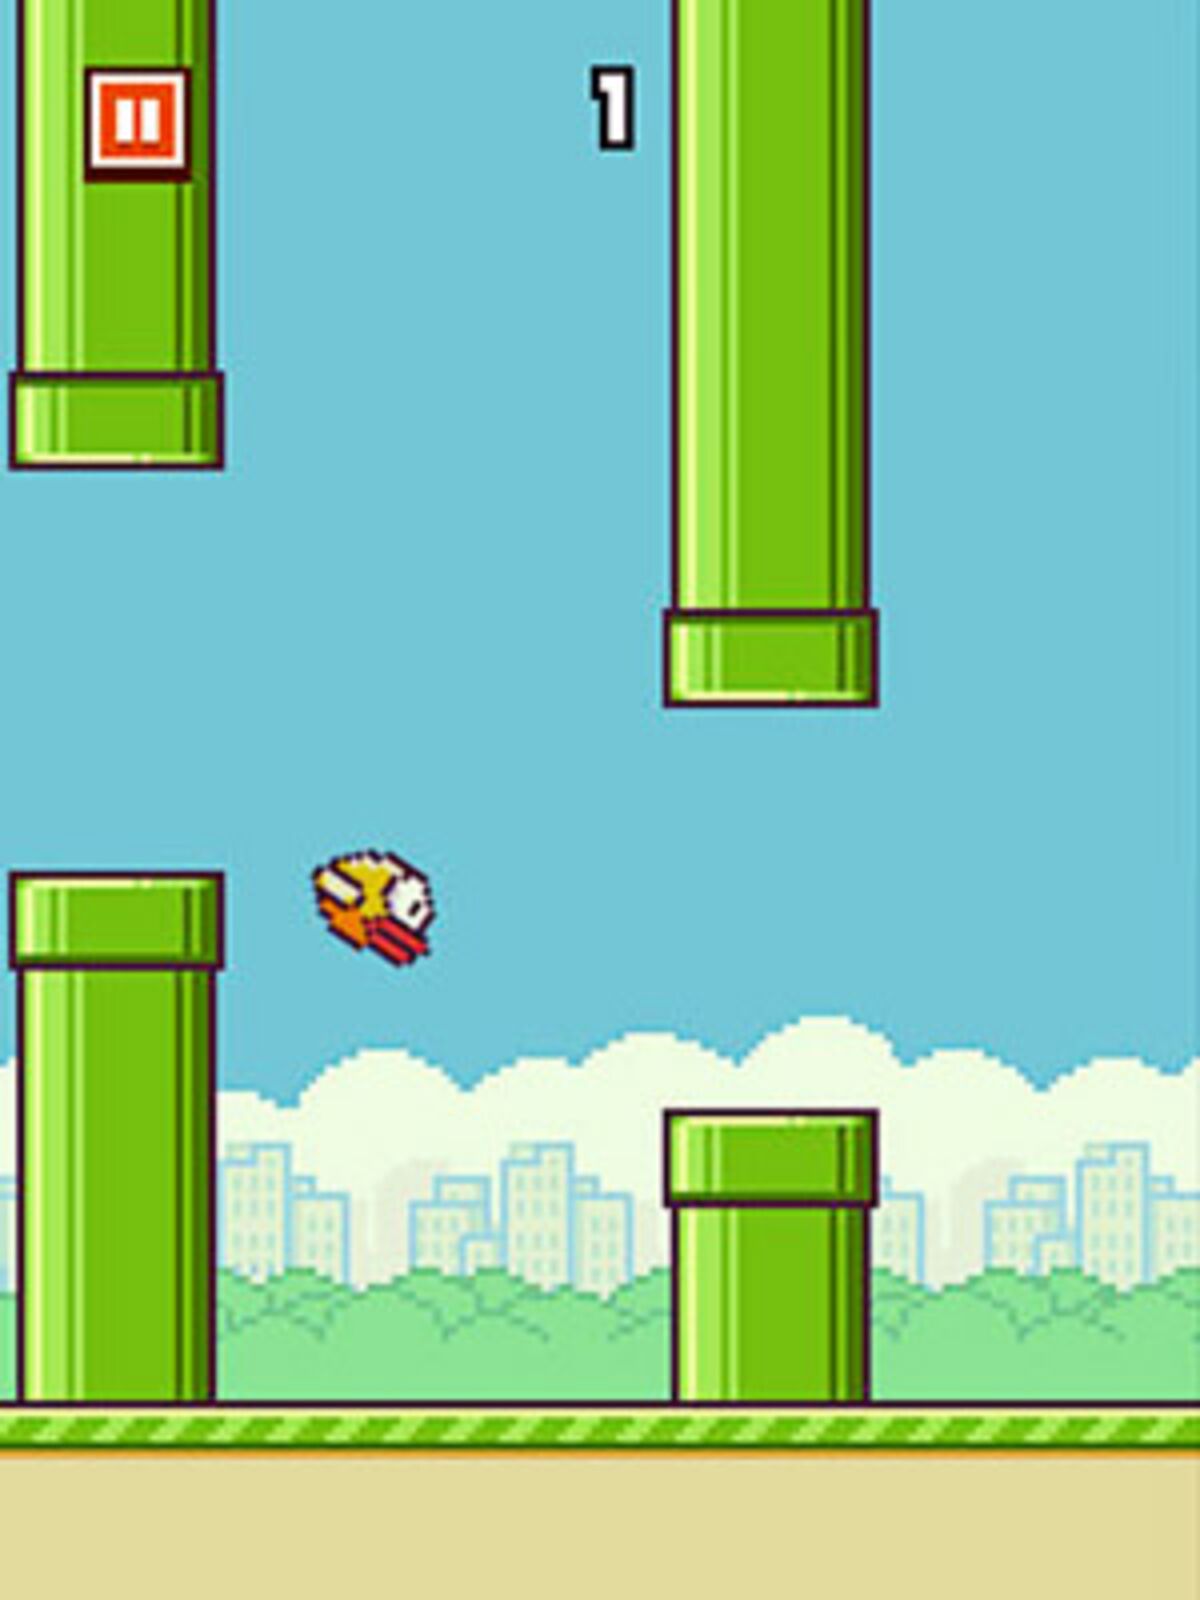 Flappy Bird game no longer for sale 